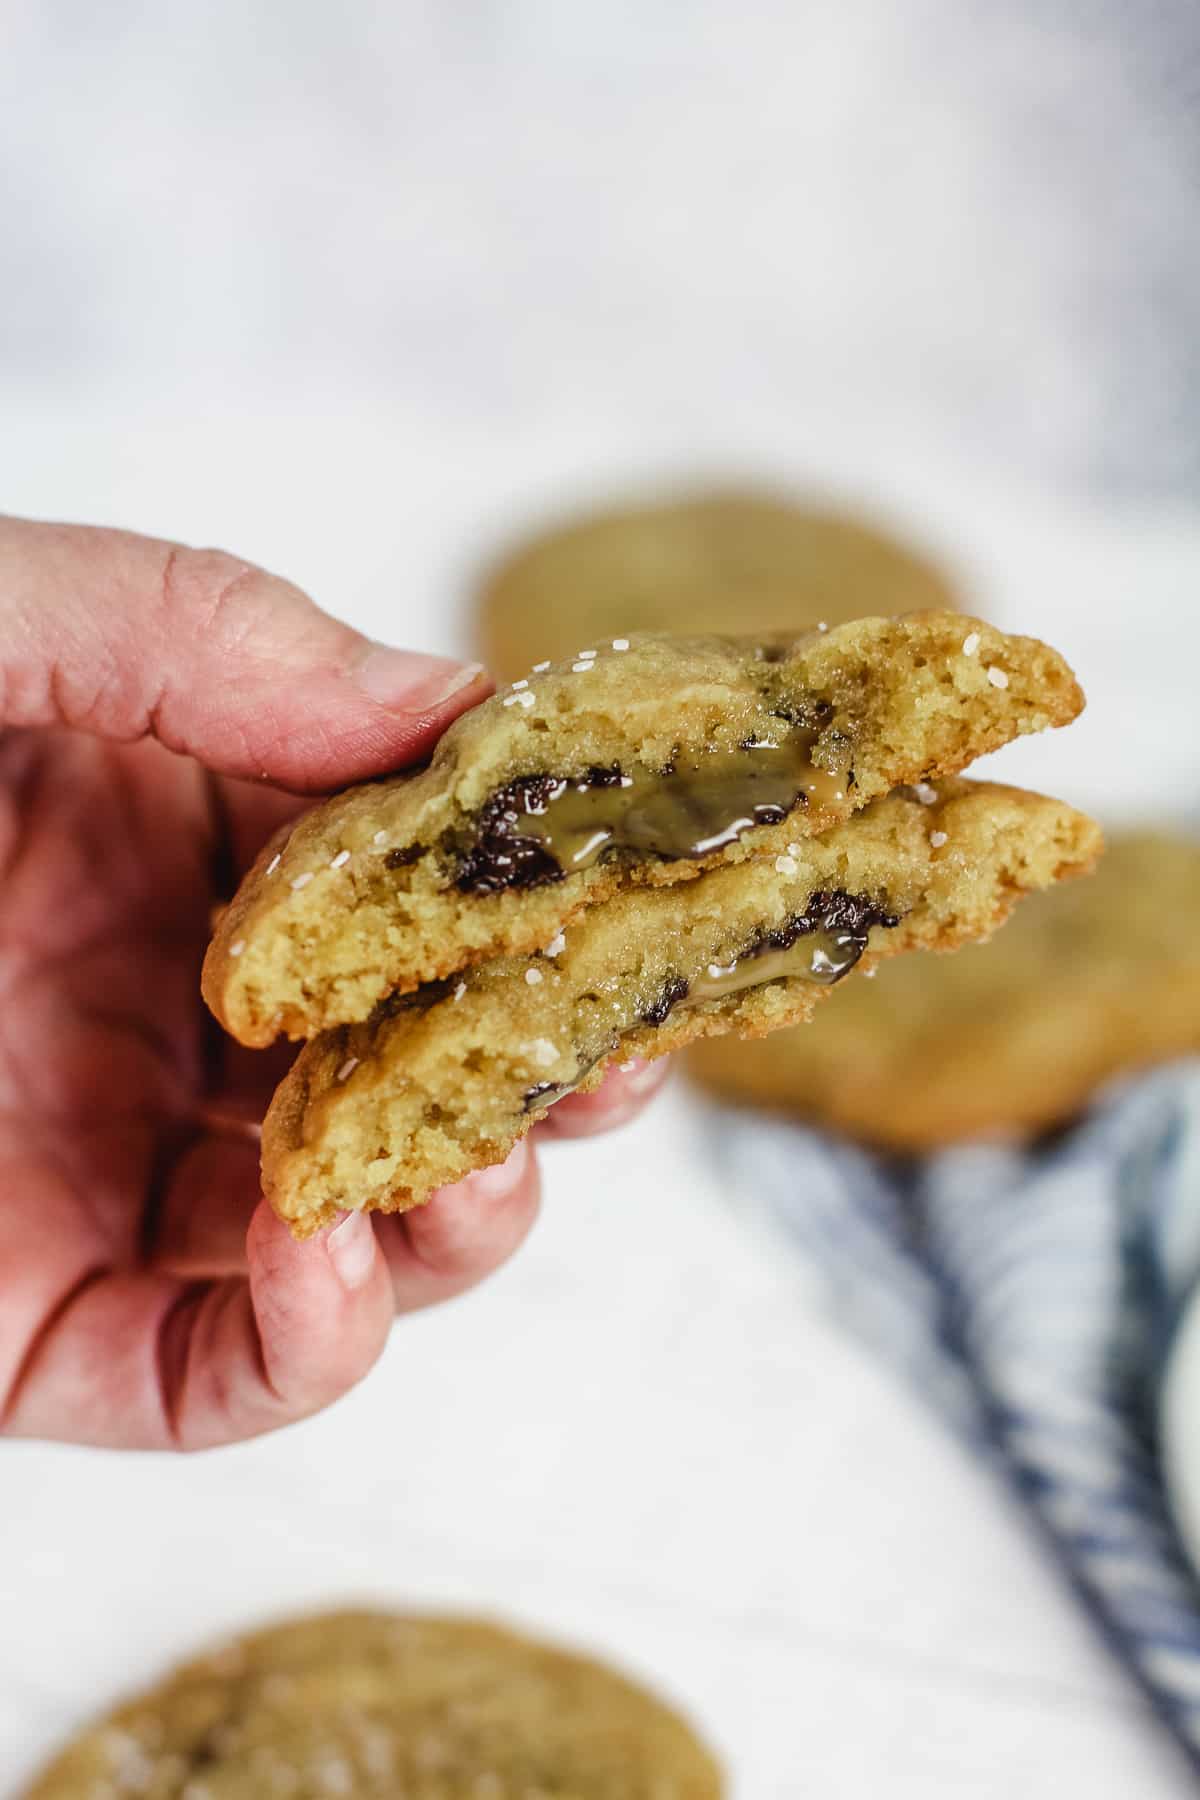 My hand holding two halves of caramel stuffed cookies.